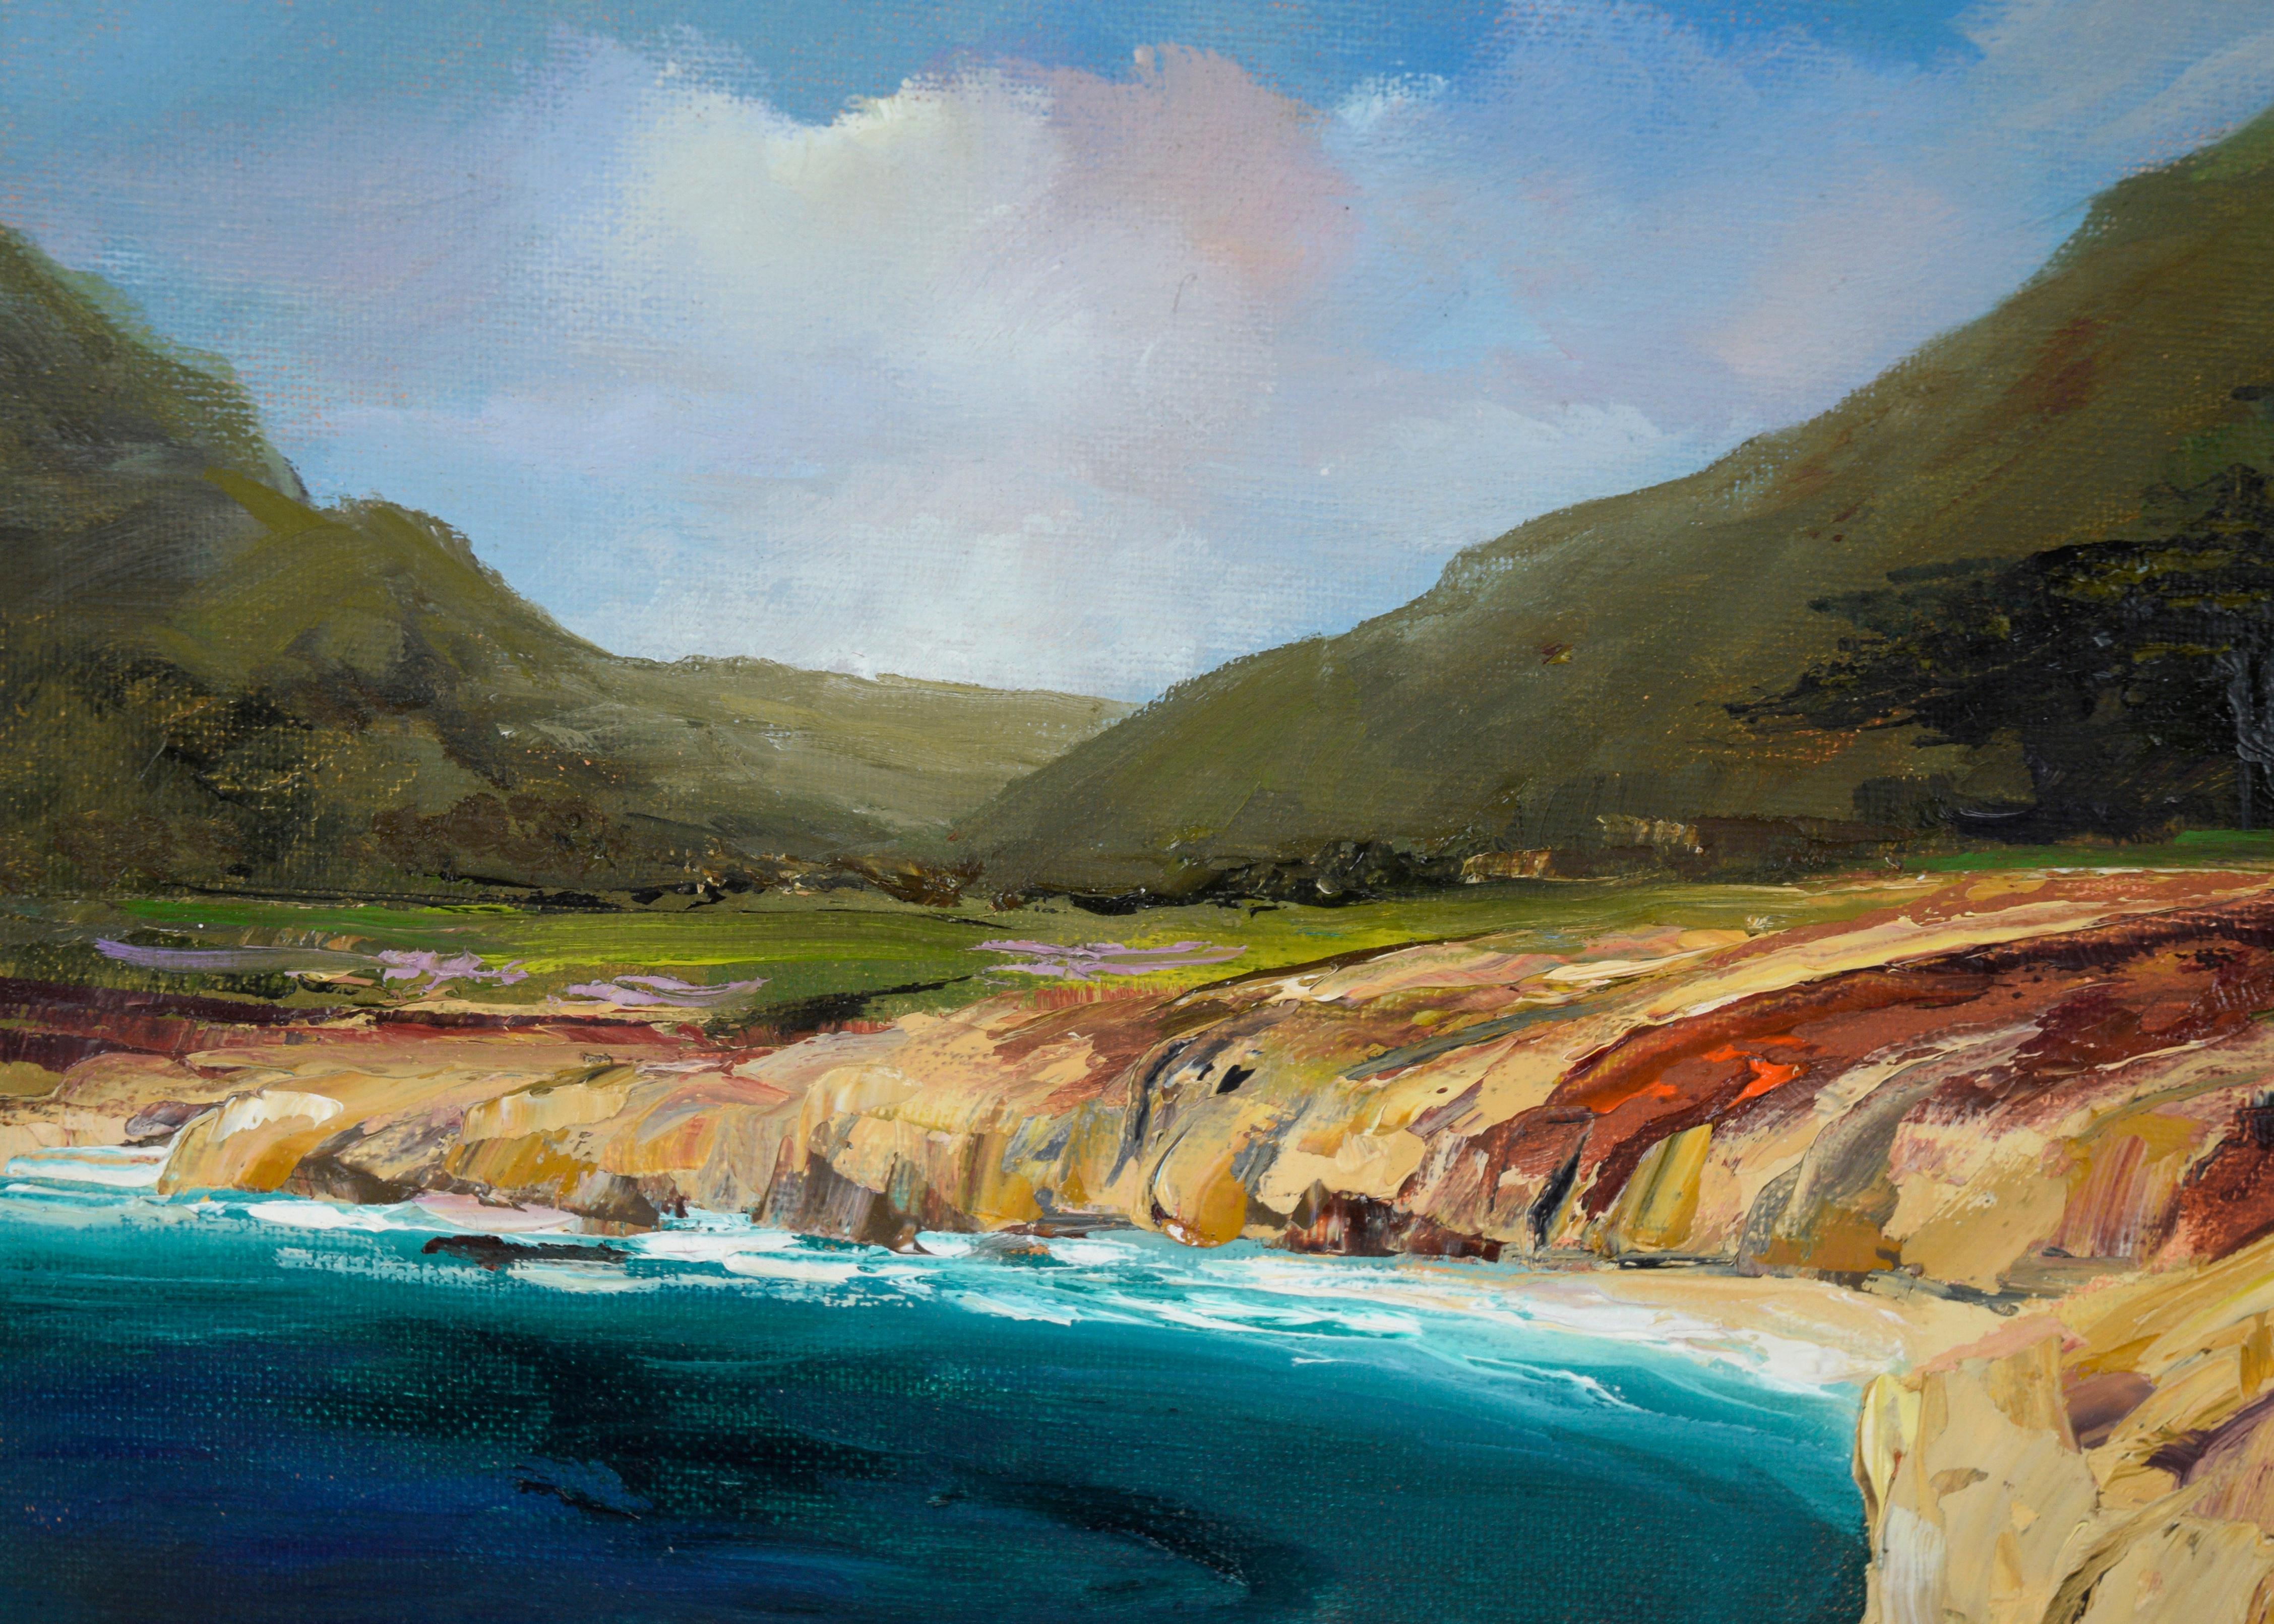 Coastal Cliffs and Lush Valley - Pacific Coast Big Sur Seascape in Oil on Canvas - Painting by Kathleen Murray